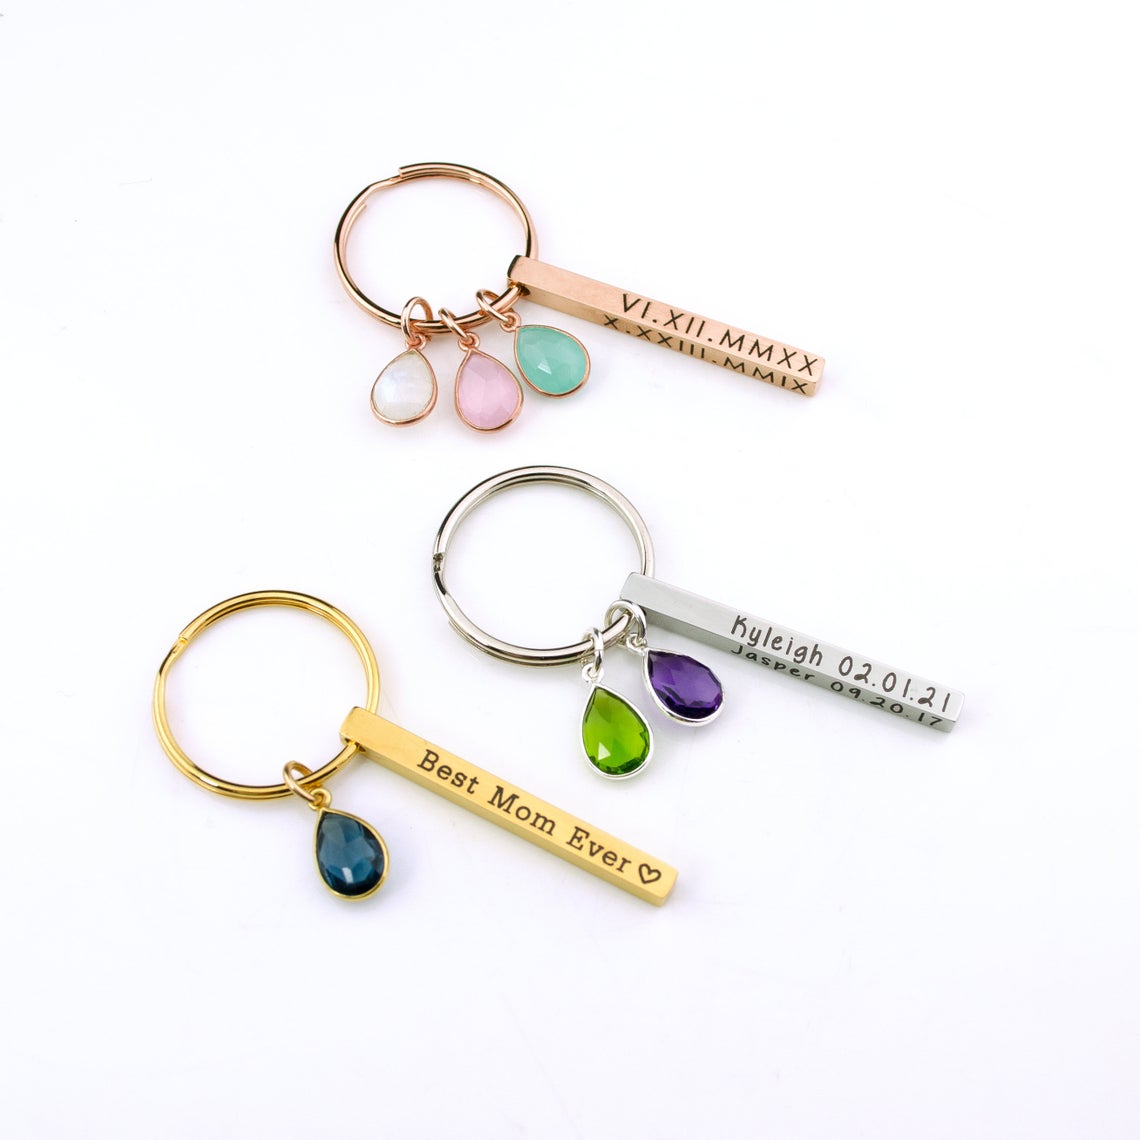 Shop Cheap Customized Key Ring Online – Crystal Moments